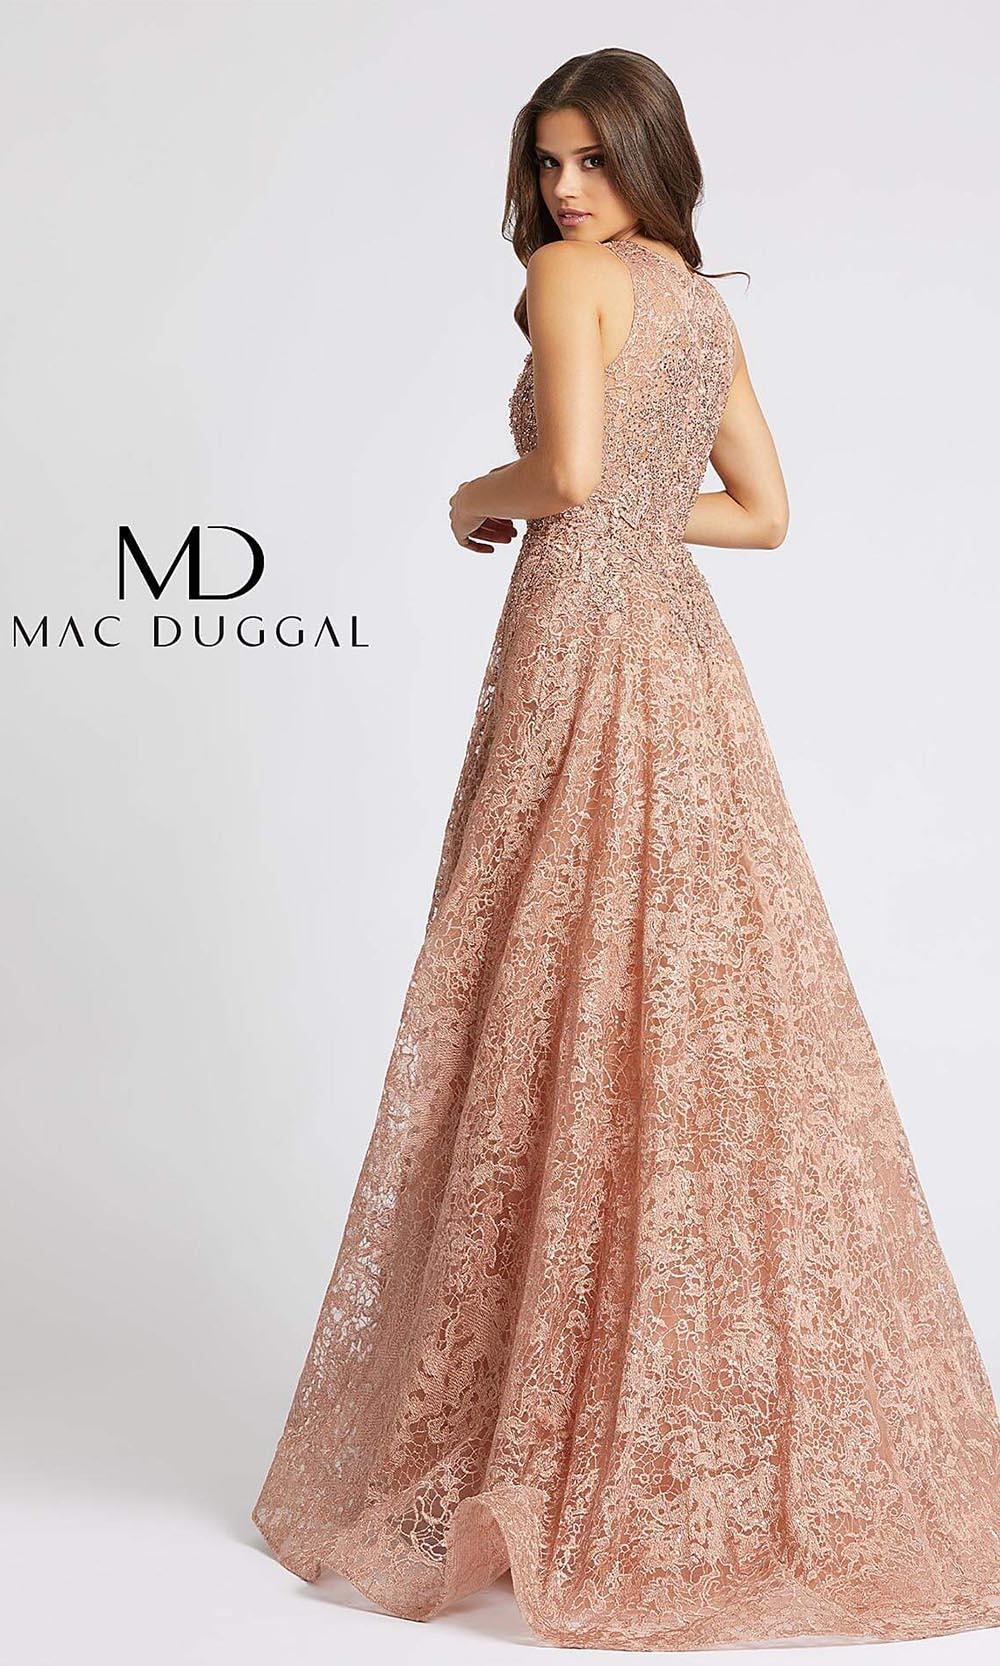 MacDuggal 20112D full length rose gold lace high neck gown w/ overlay skirt. Fitted modest dress is perfect for muslim wedding, indowestern gown, engagement dress, wedding reception dress, gala. Long light gold evening gown comes in plus sizes-b